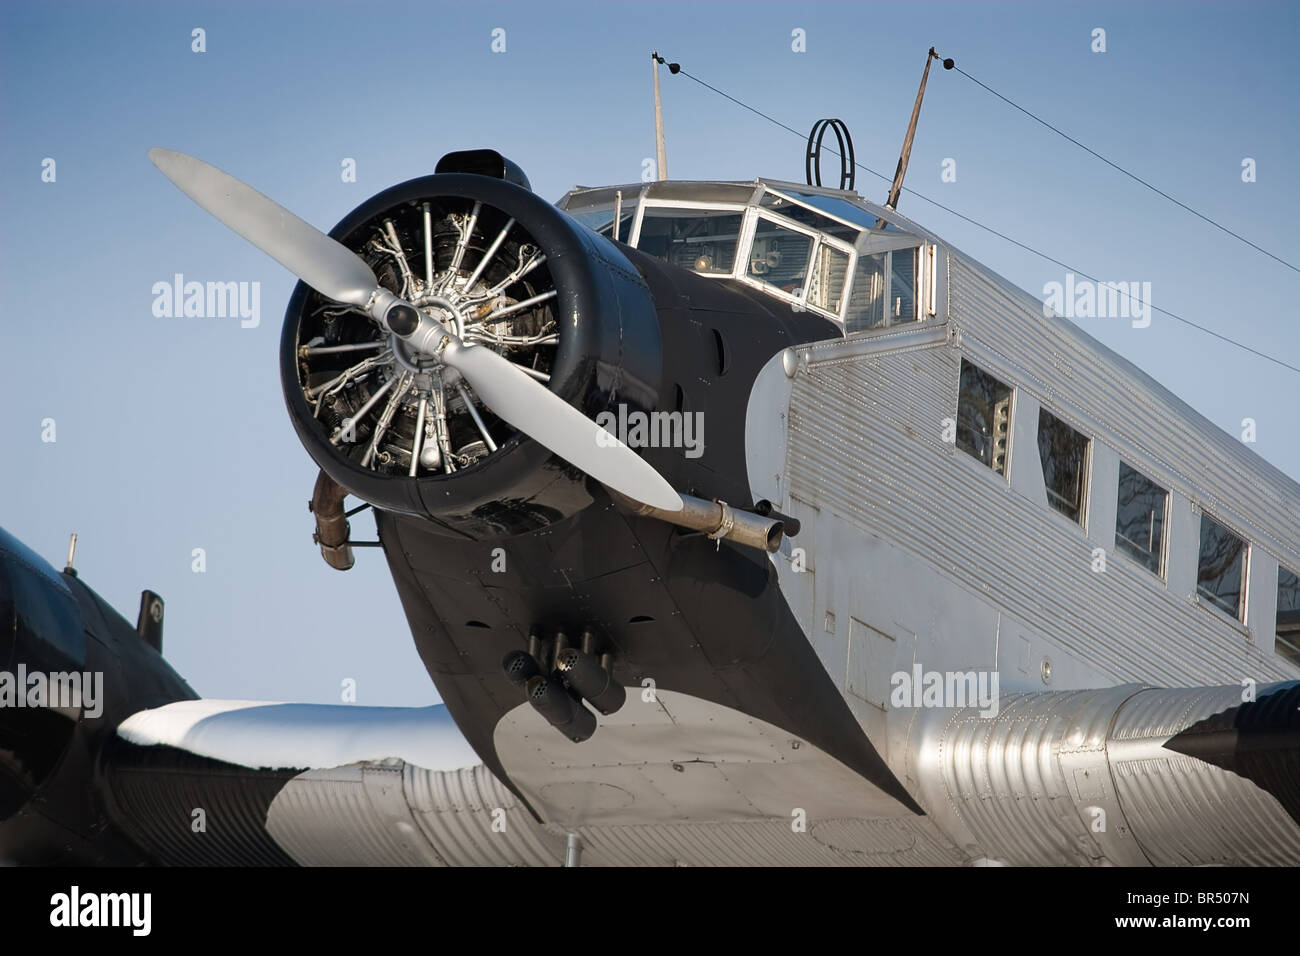 The Junkers Ju 52 was used as an civilian airliner and military aircraft manufactured between 1932 and 1945 by Junkers. Stock Photo